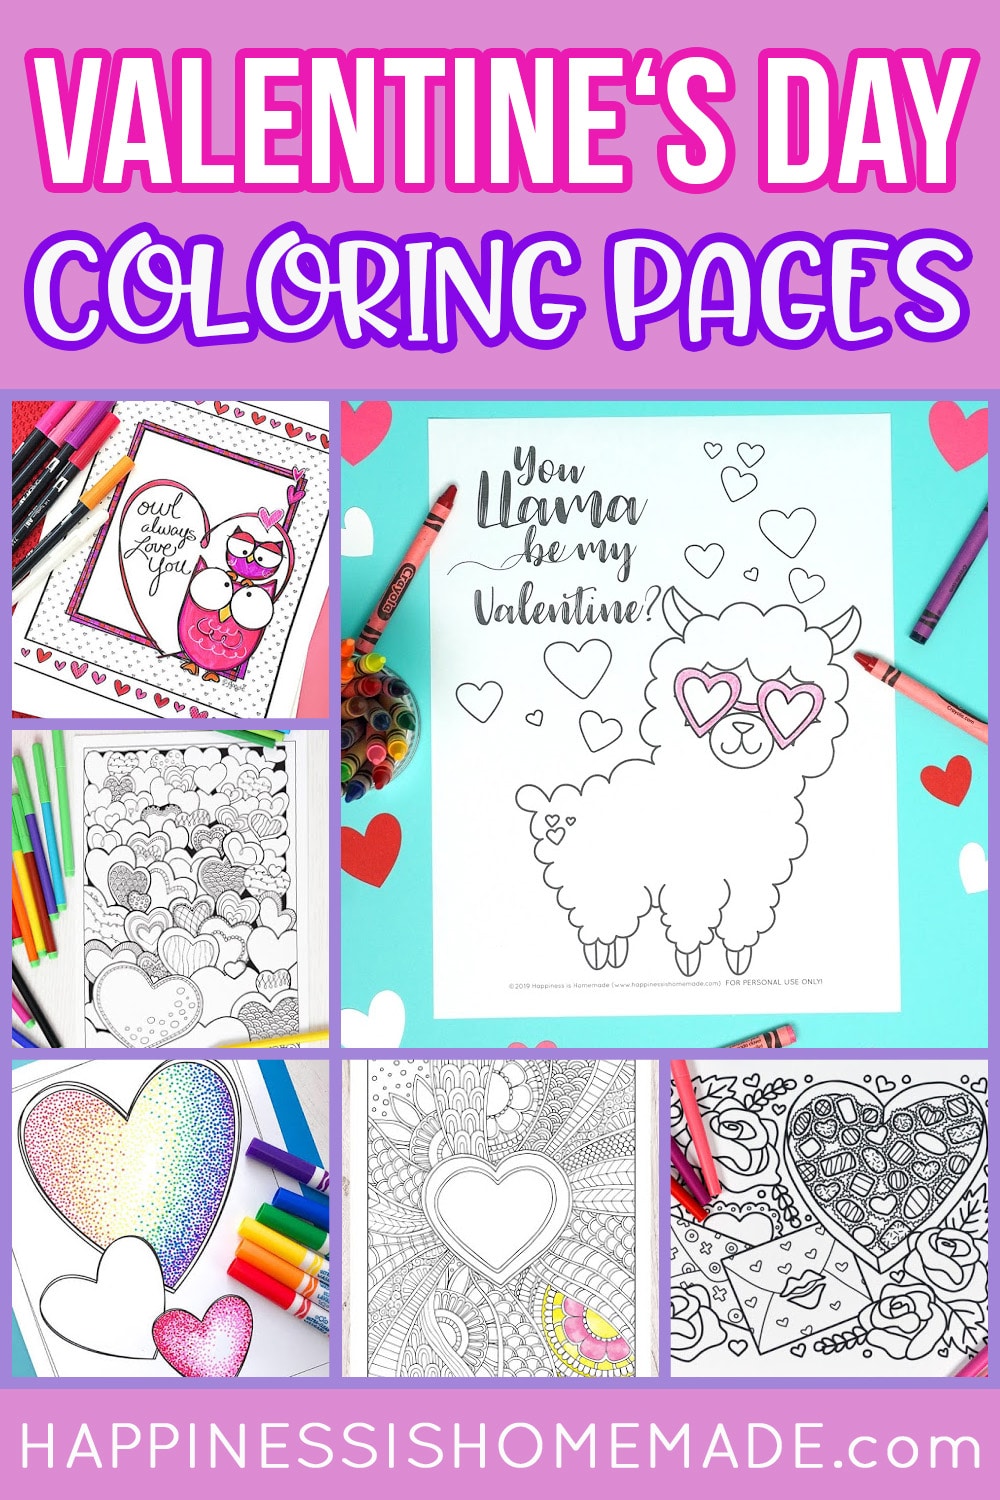 Collage of free printable valentine coloring pages - six coloring sheets and "Valentine's Day Coloring Pages" text on purple background